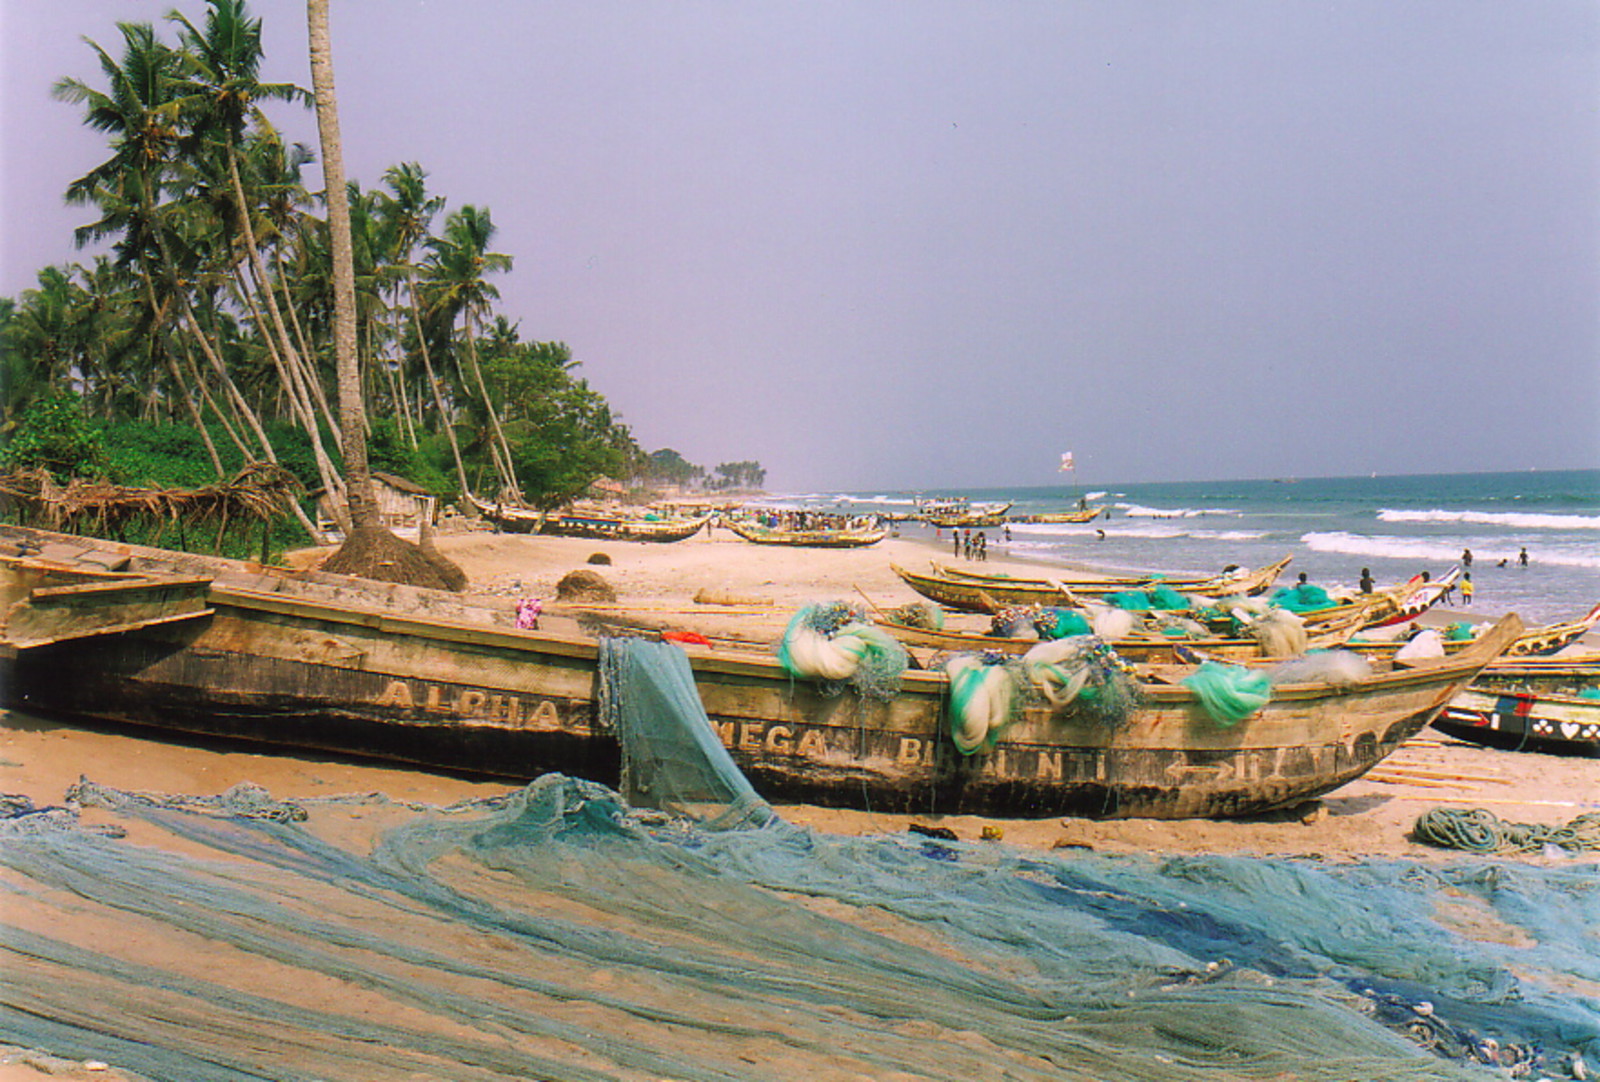 Fishing boats on the beach at Kokrobite